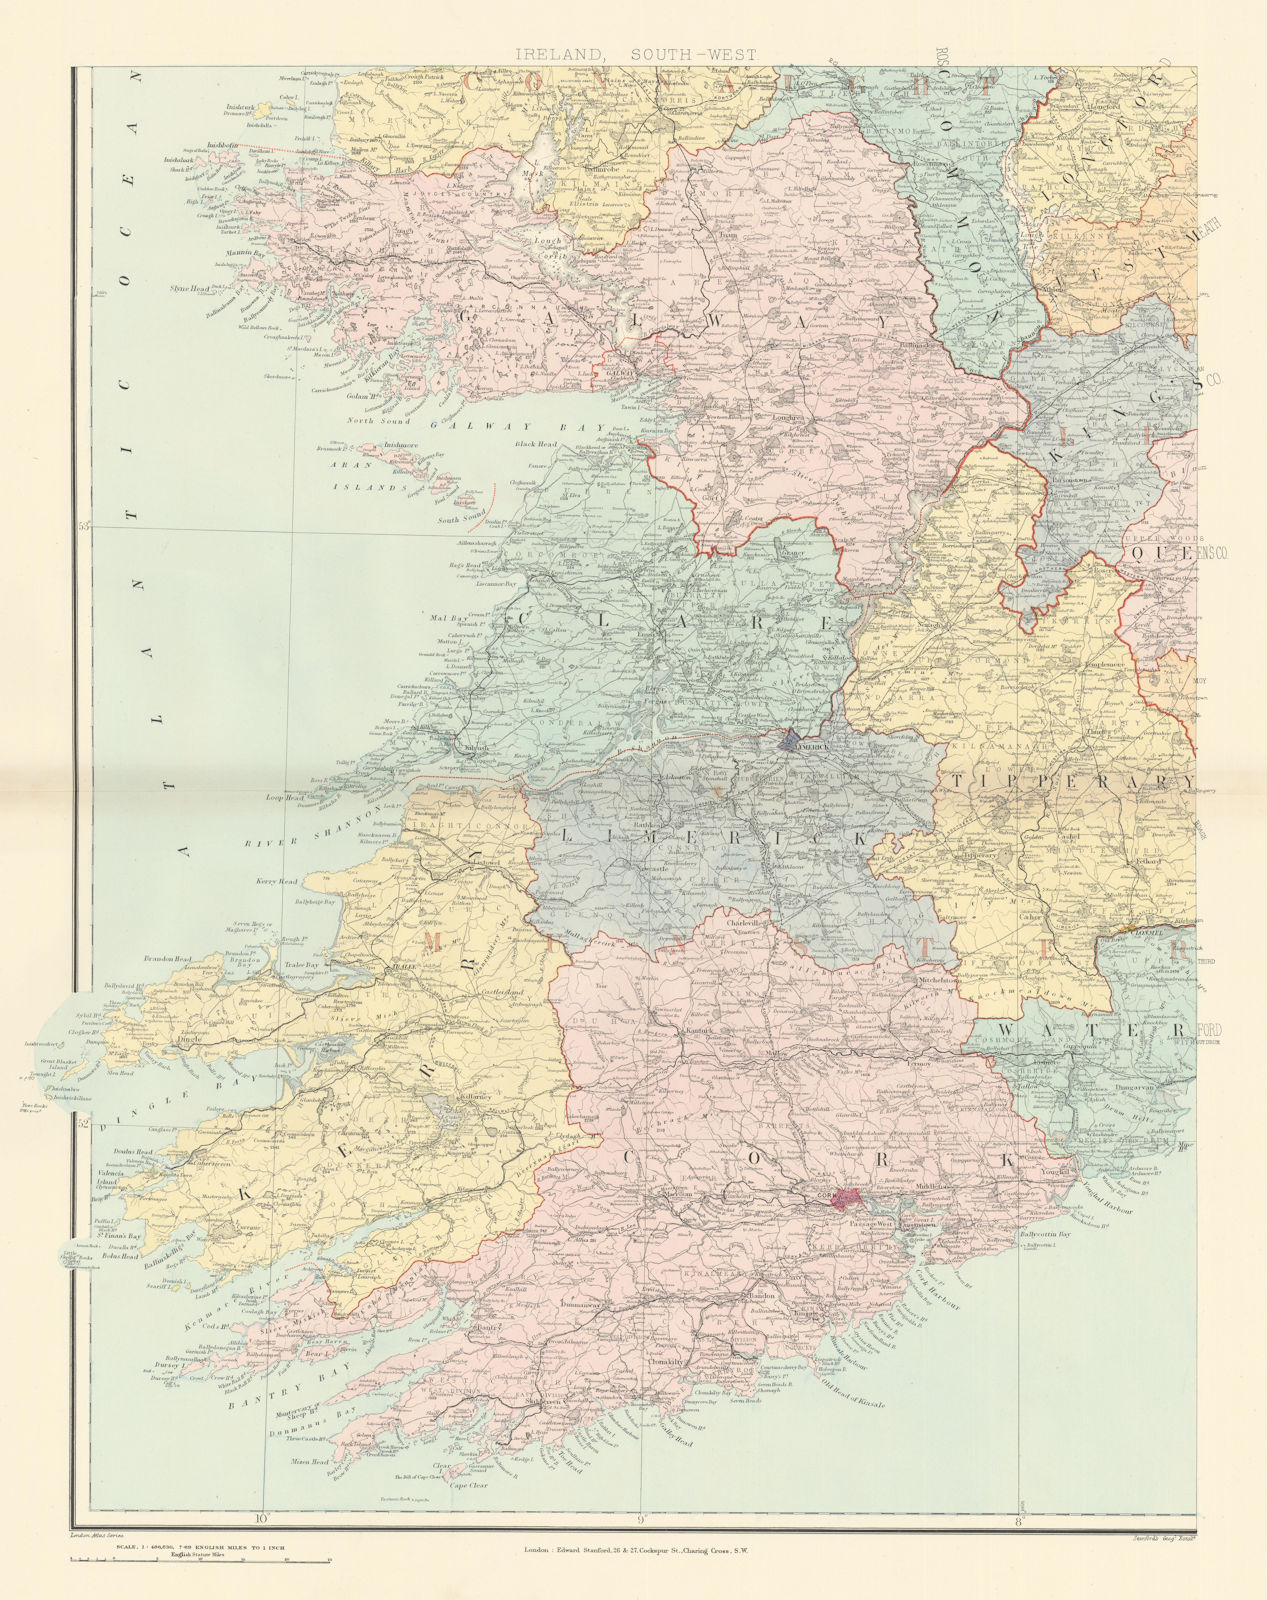 Associate Product Ireland south-west Munster Kerry Limerick Cork Clare Limerick. STANFORD 1896 map